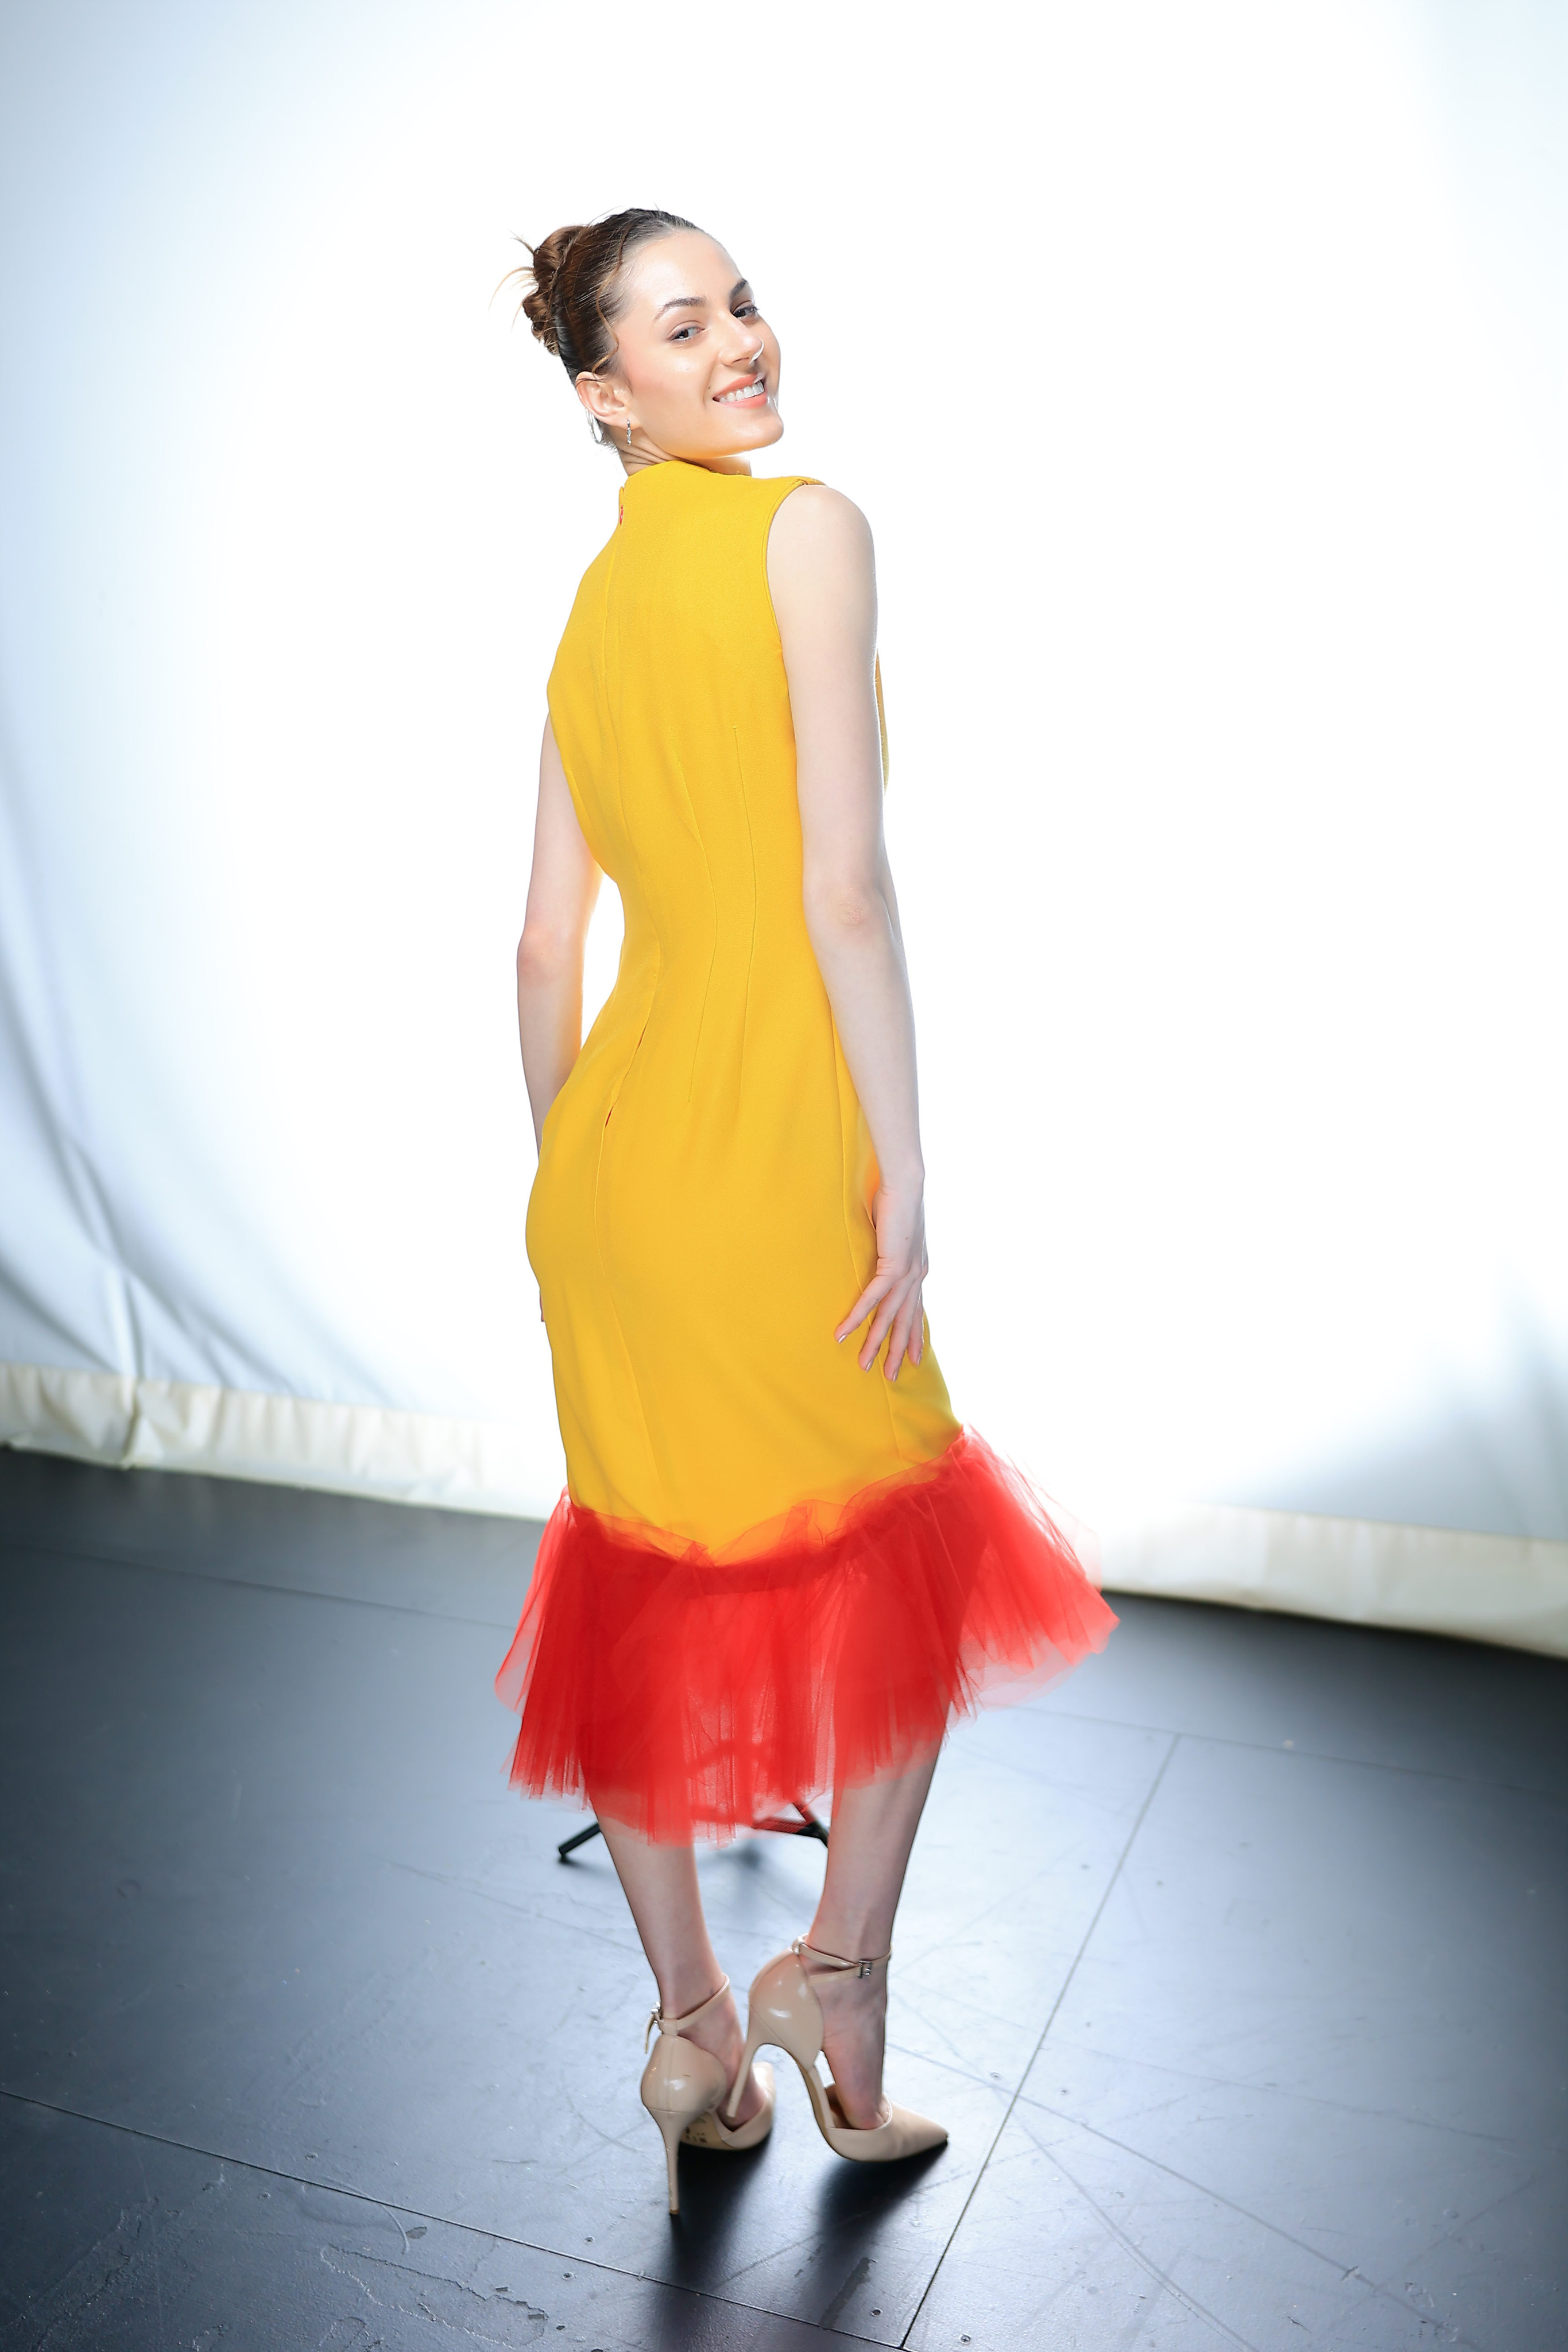 Model posed for photos, wearing beige heels and a yellow and red sleeveless dress